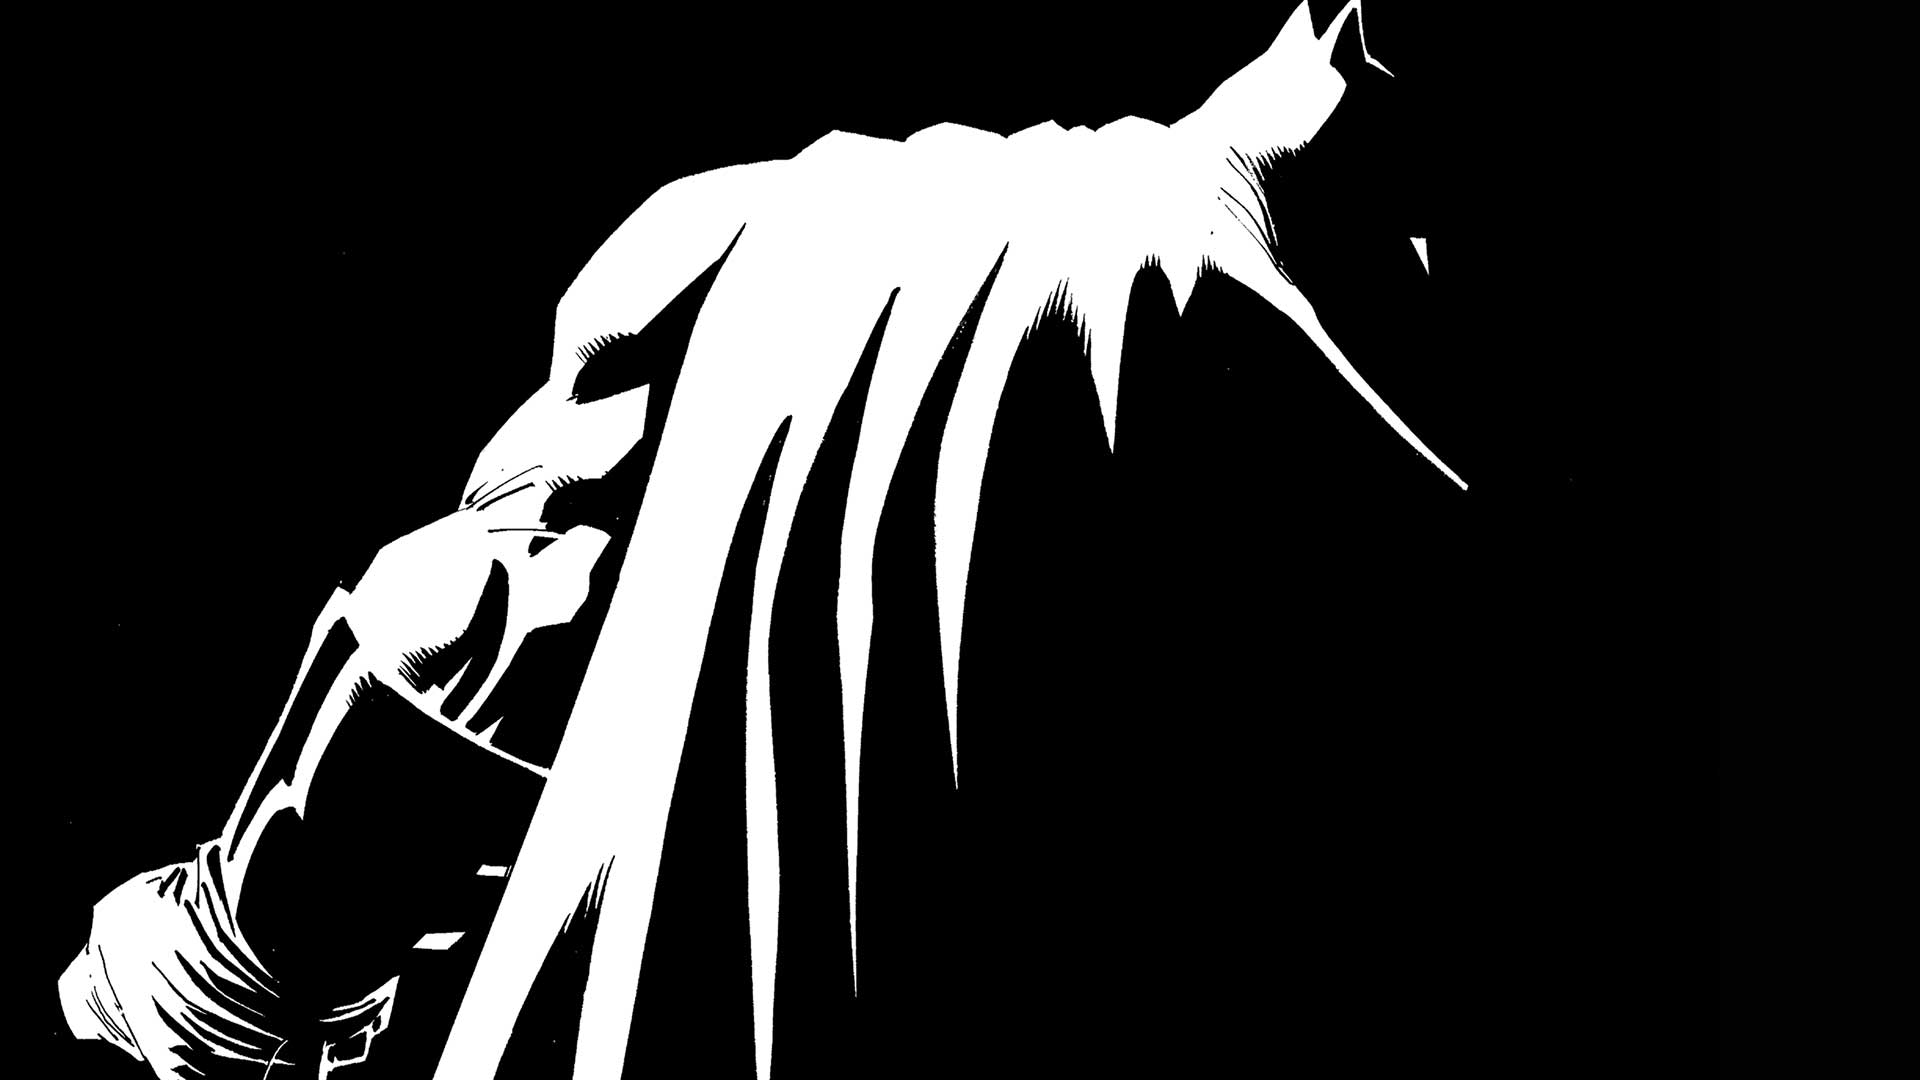 Dark Knight III: The Master Race #1 Director's Cut Review